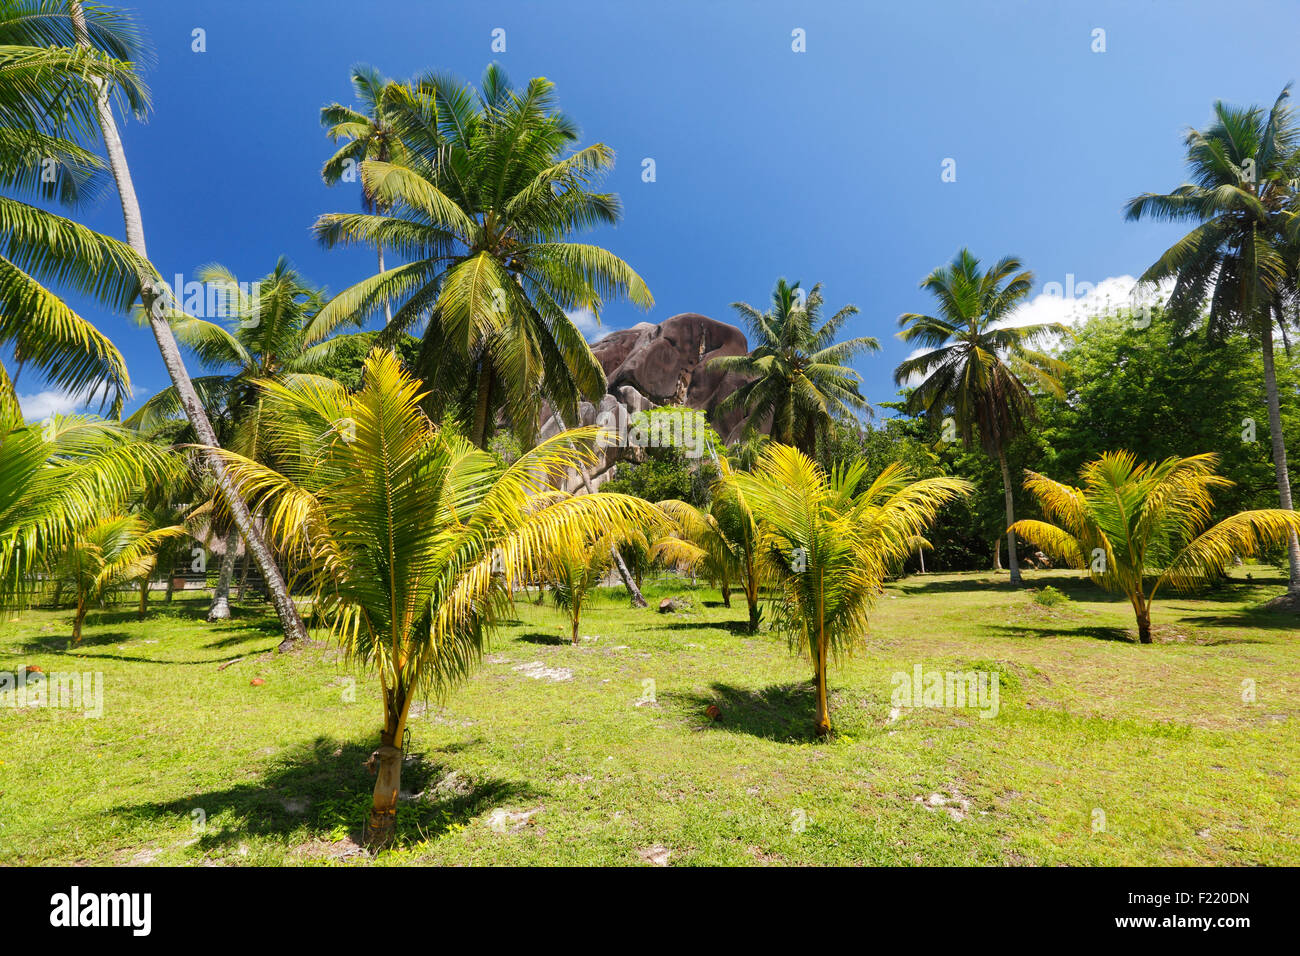 Palm trees in national park on island La Digue, Seychelles. Stock Photo